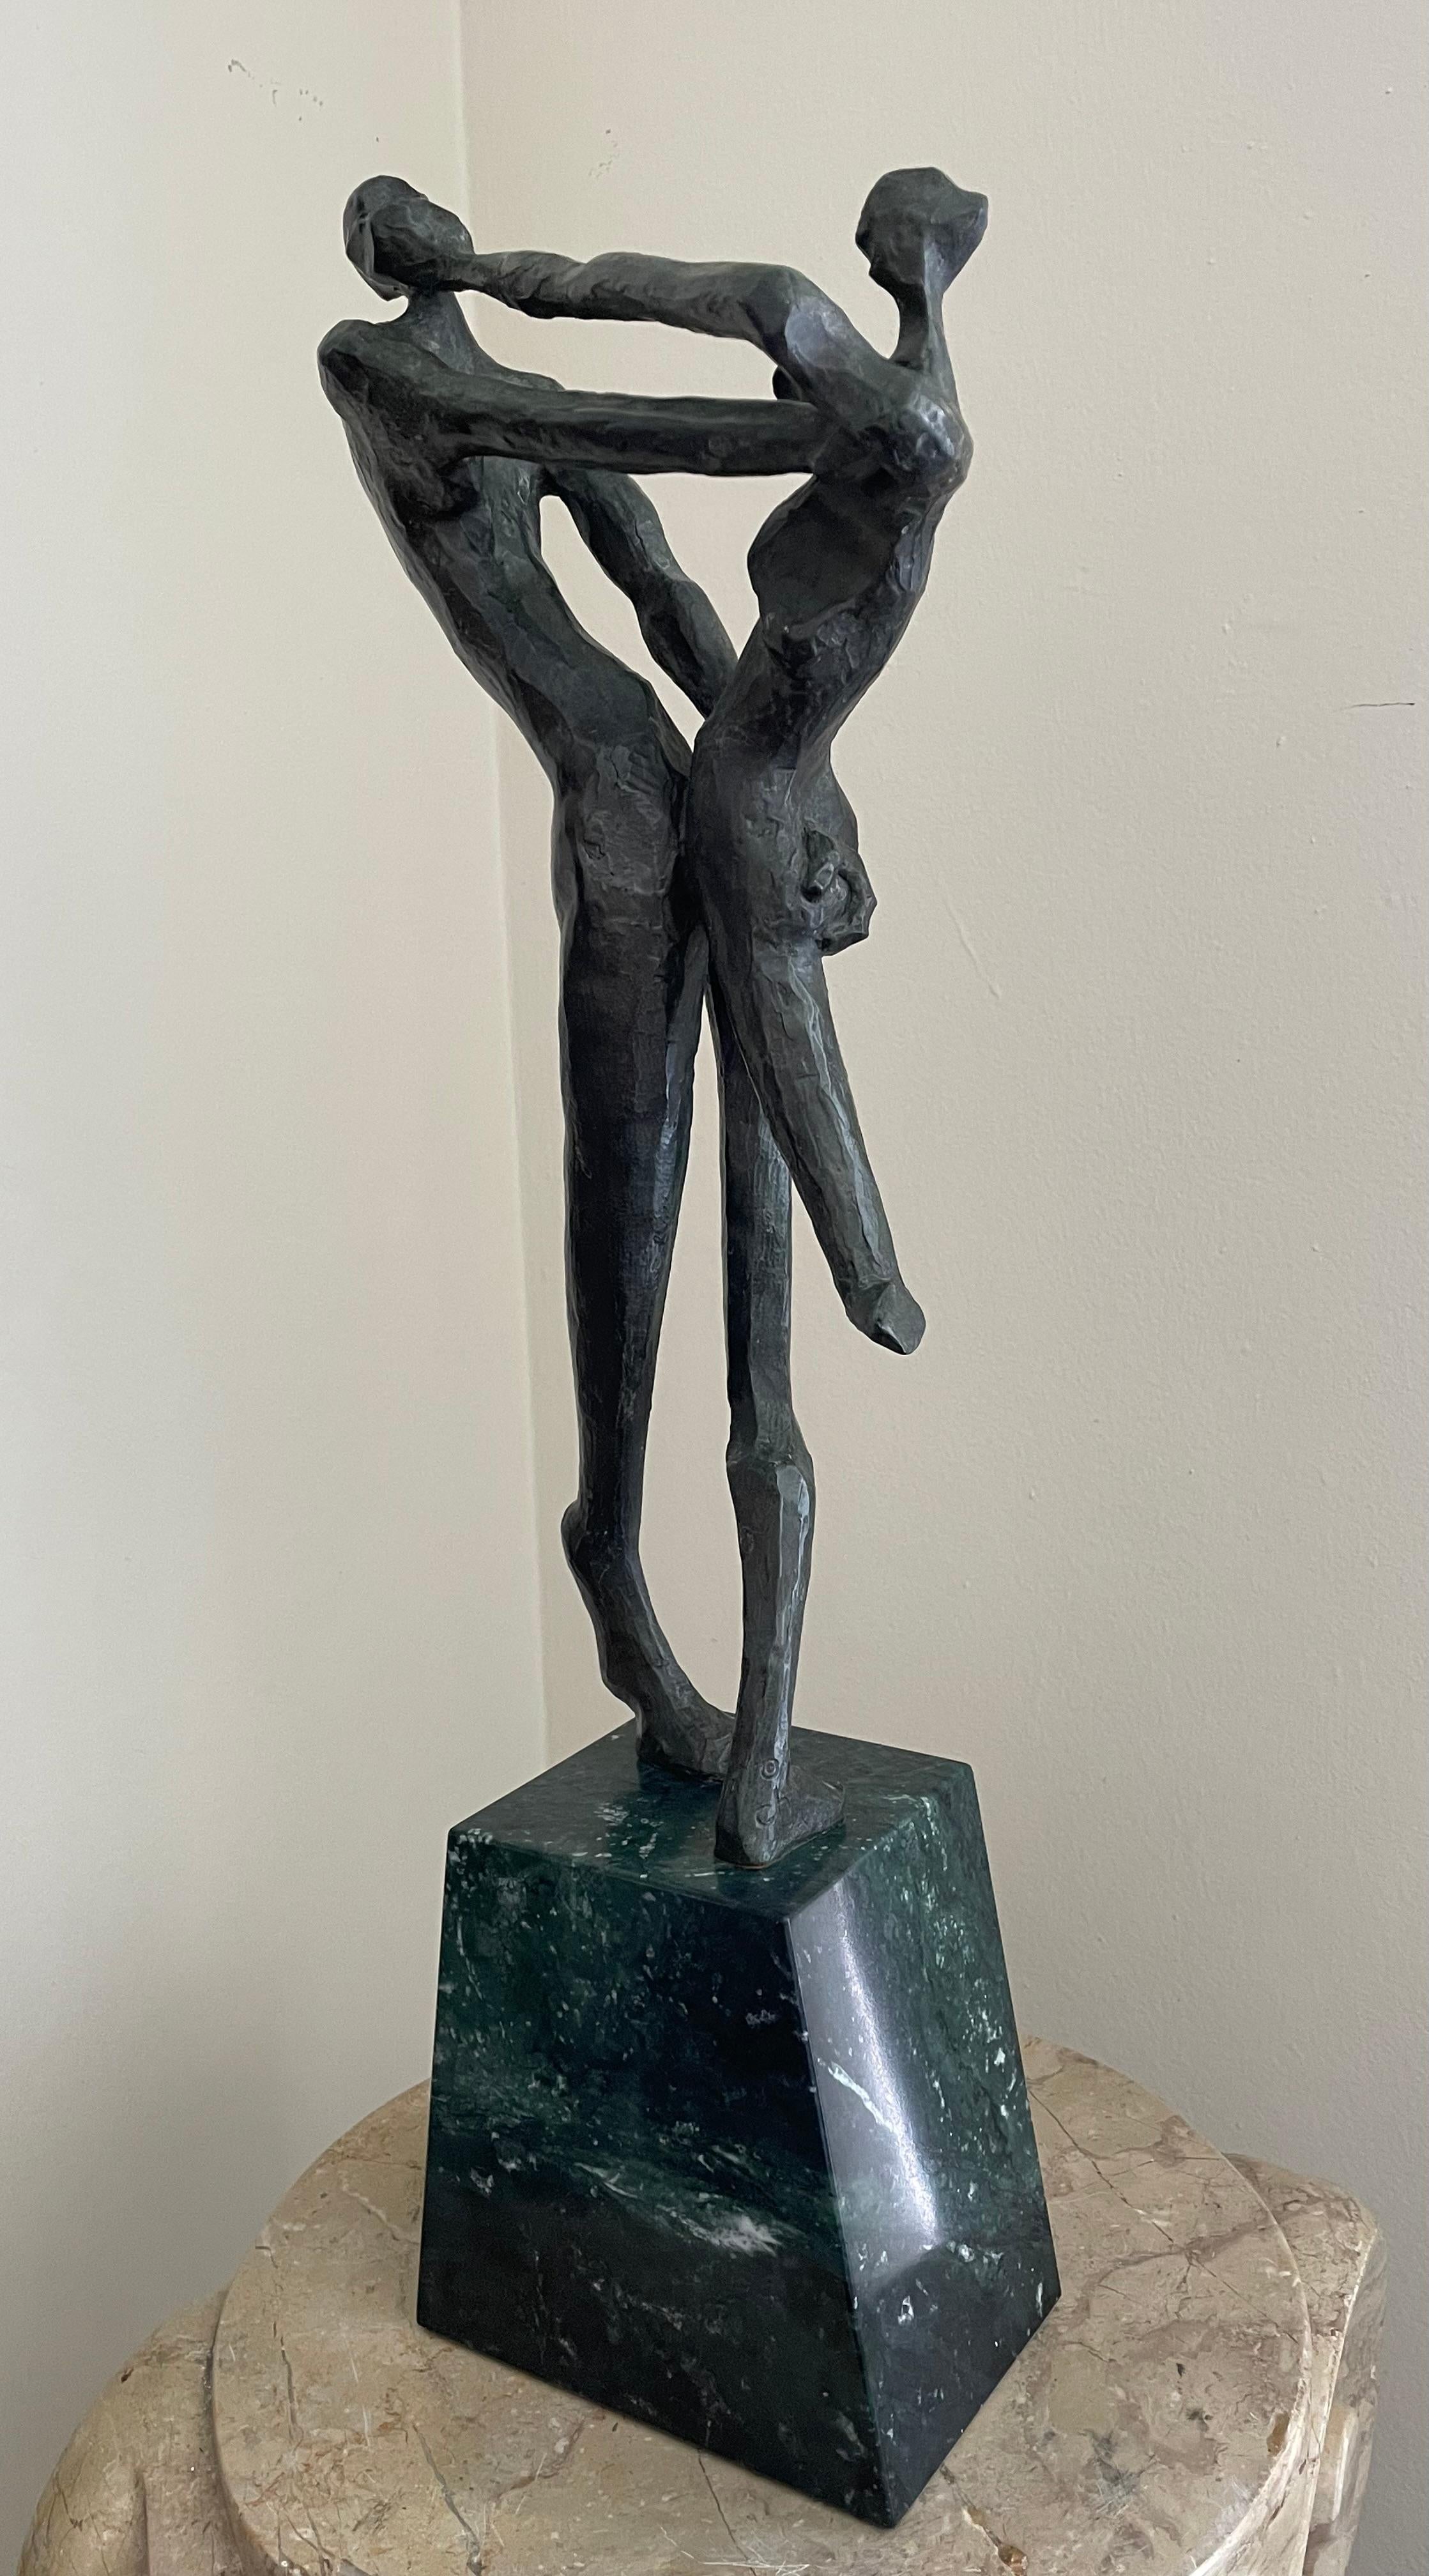 Dance - Cubist Sculpture by Charna Rickey